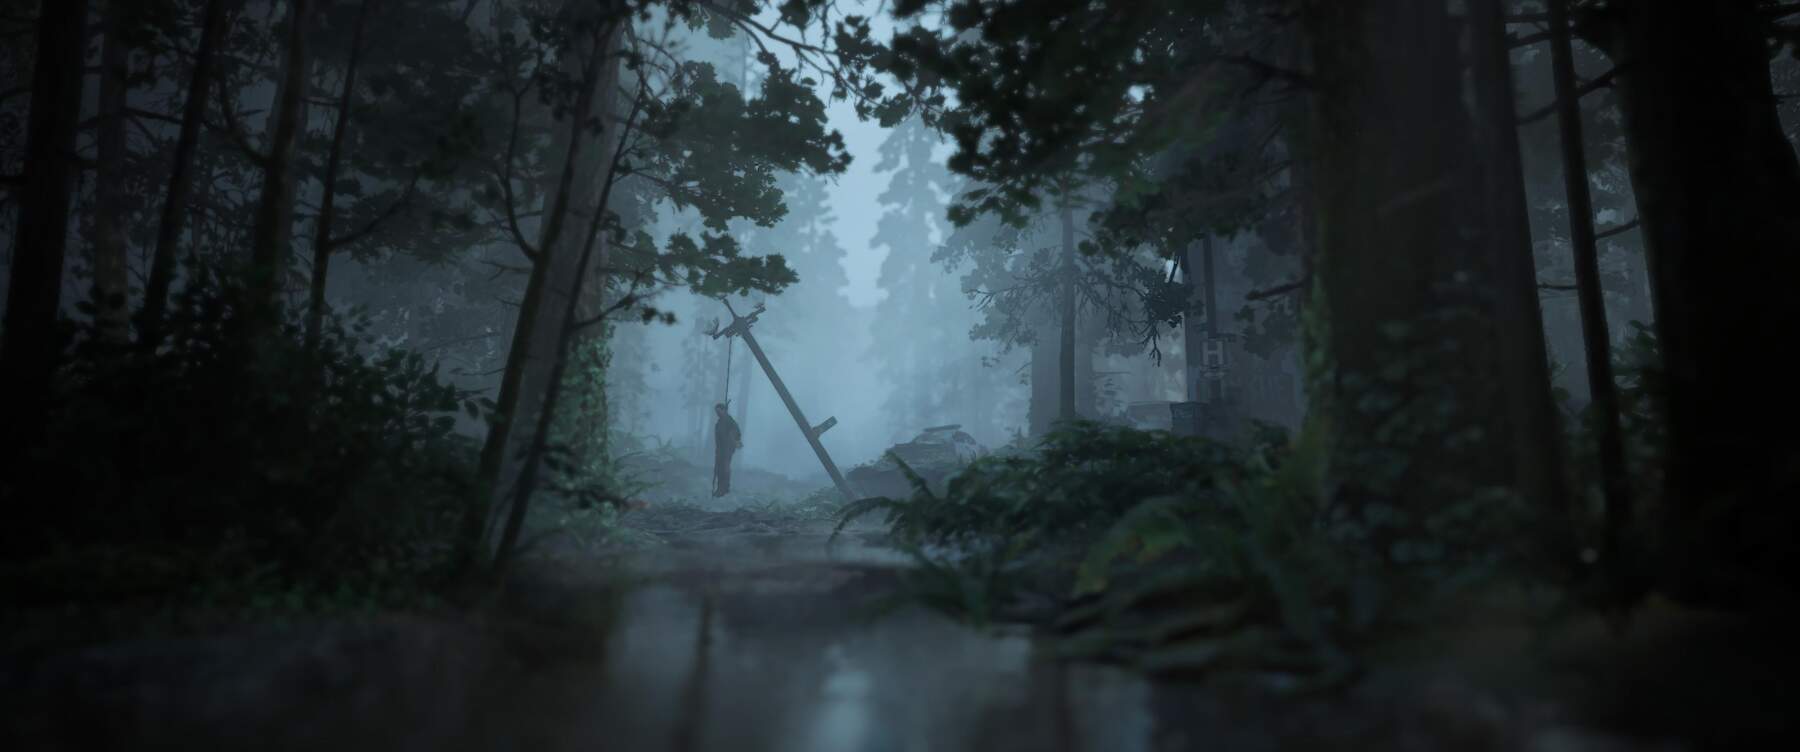 The Forest, in "The Last of Us: Part II", captured by Marty Friedel